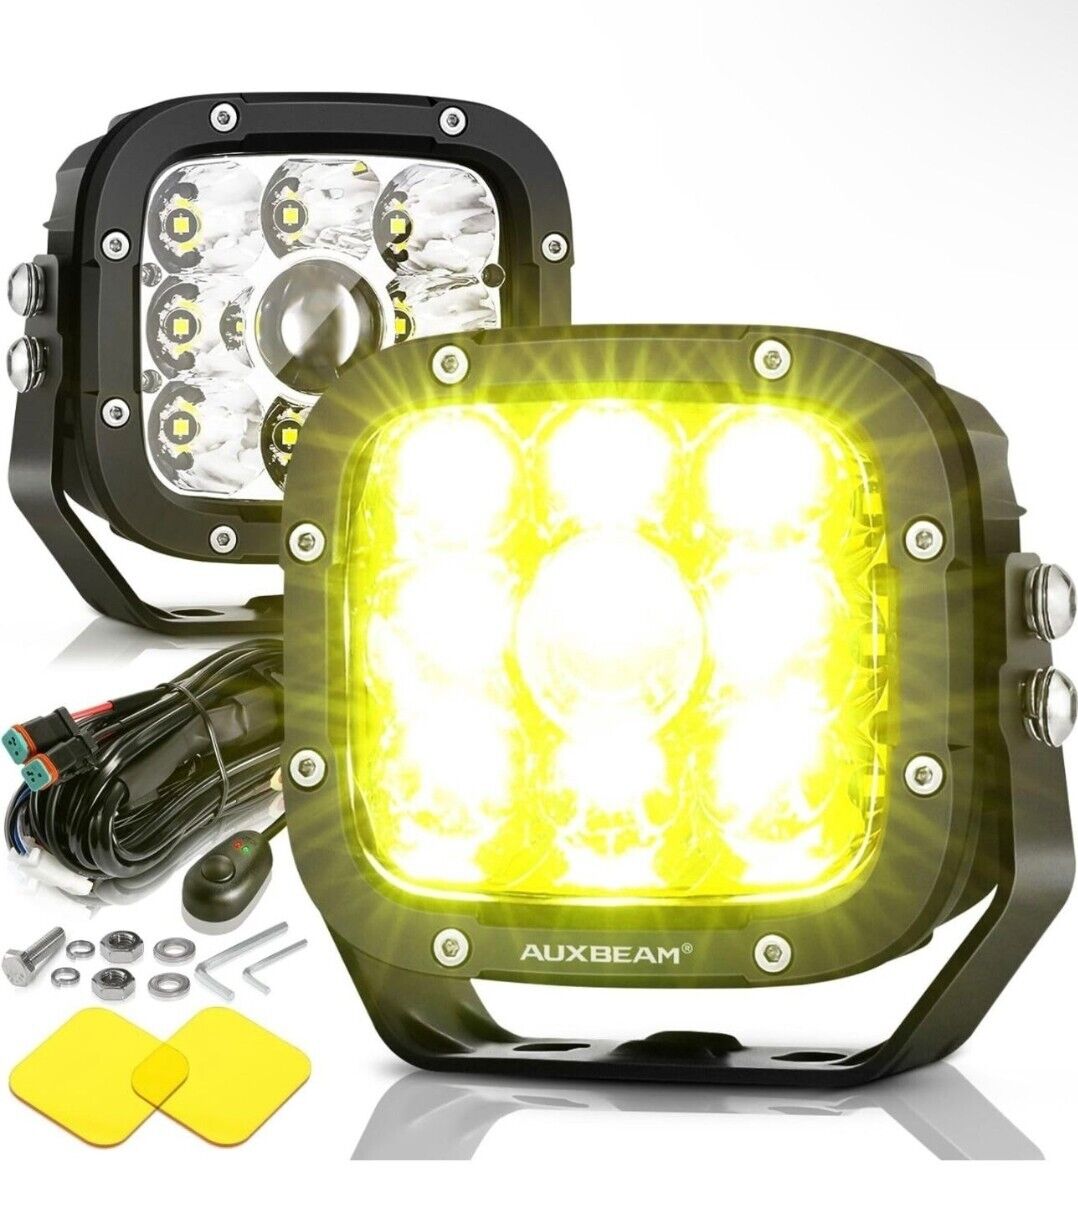 AUXBEAM 5 inch LED Driving Lights White Amber Spot lights For Jeep Offroad Truck